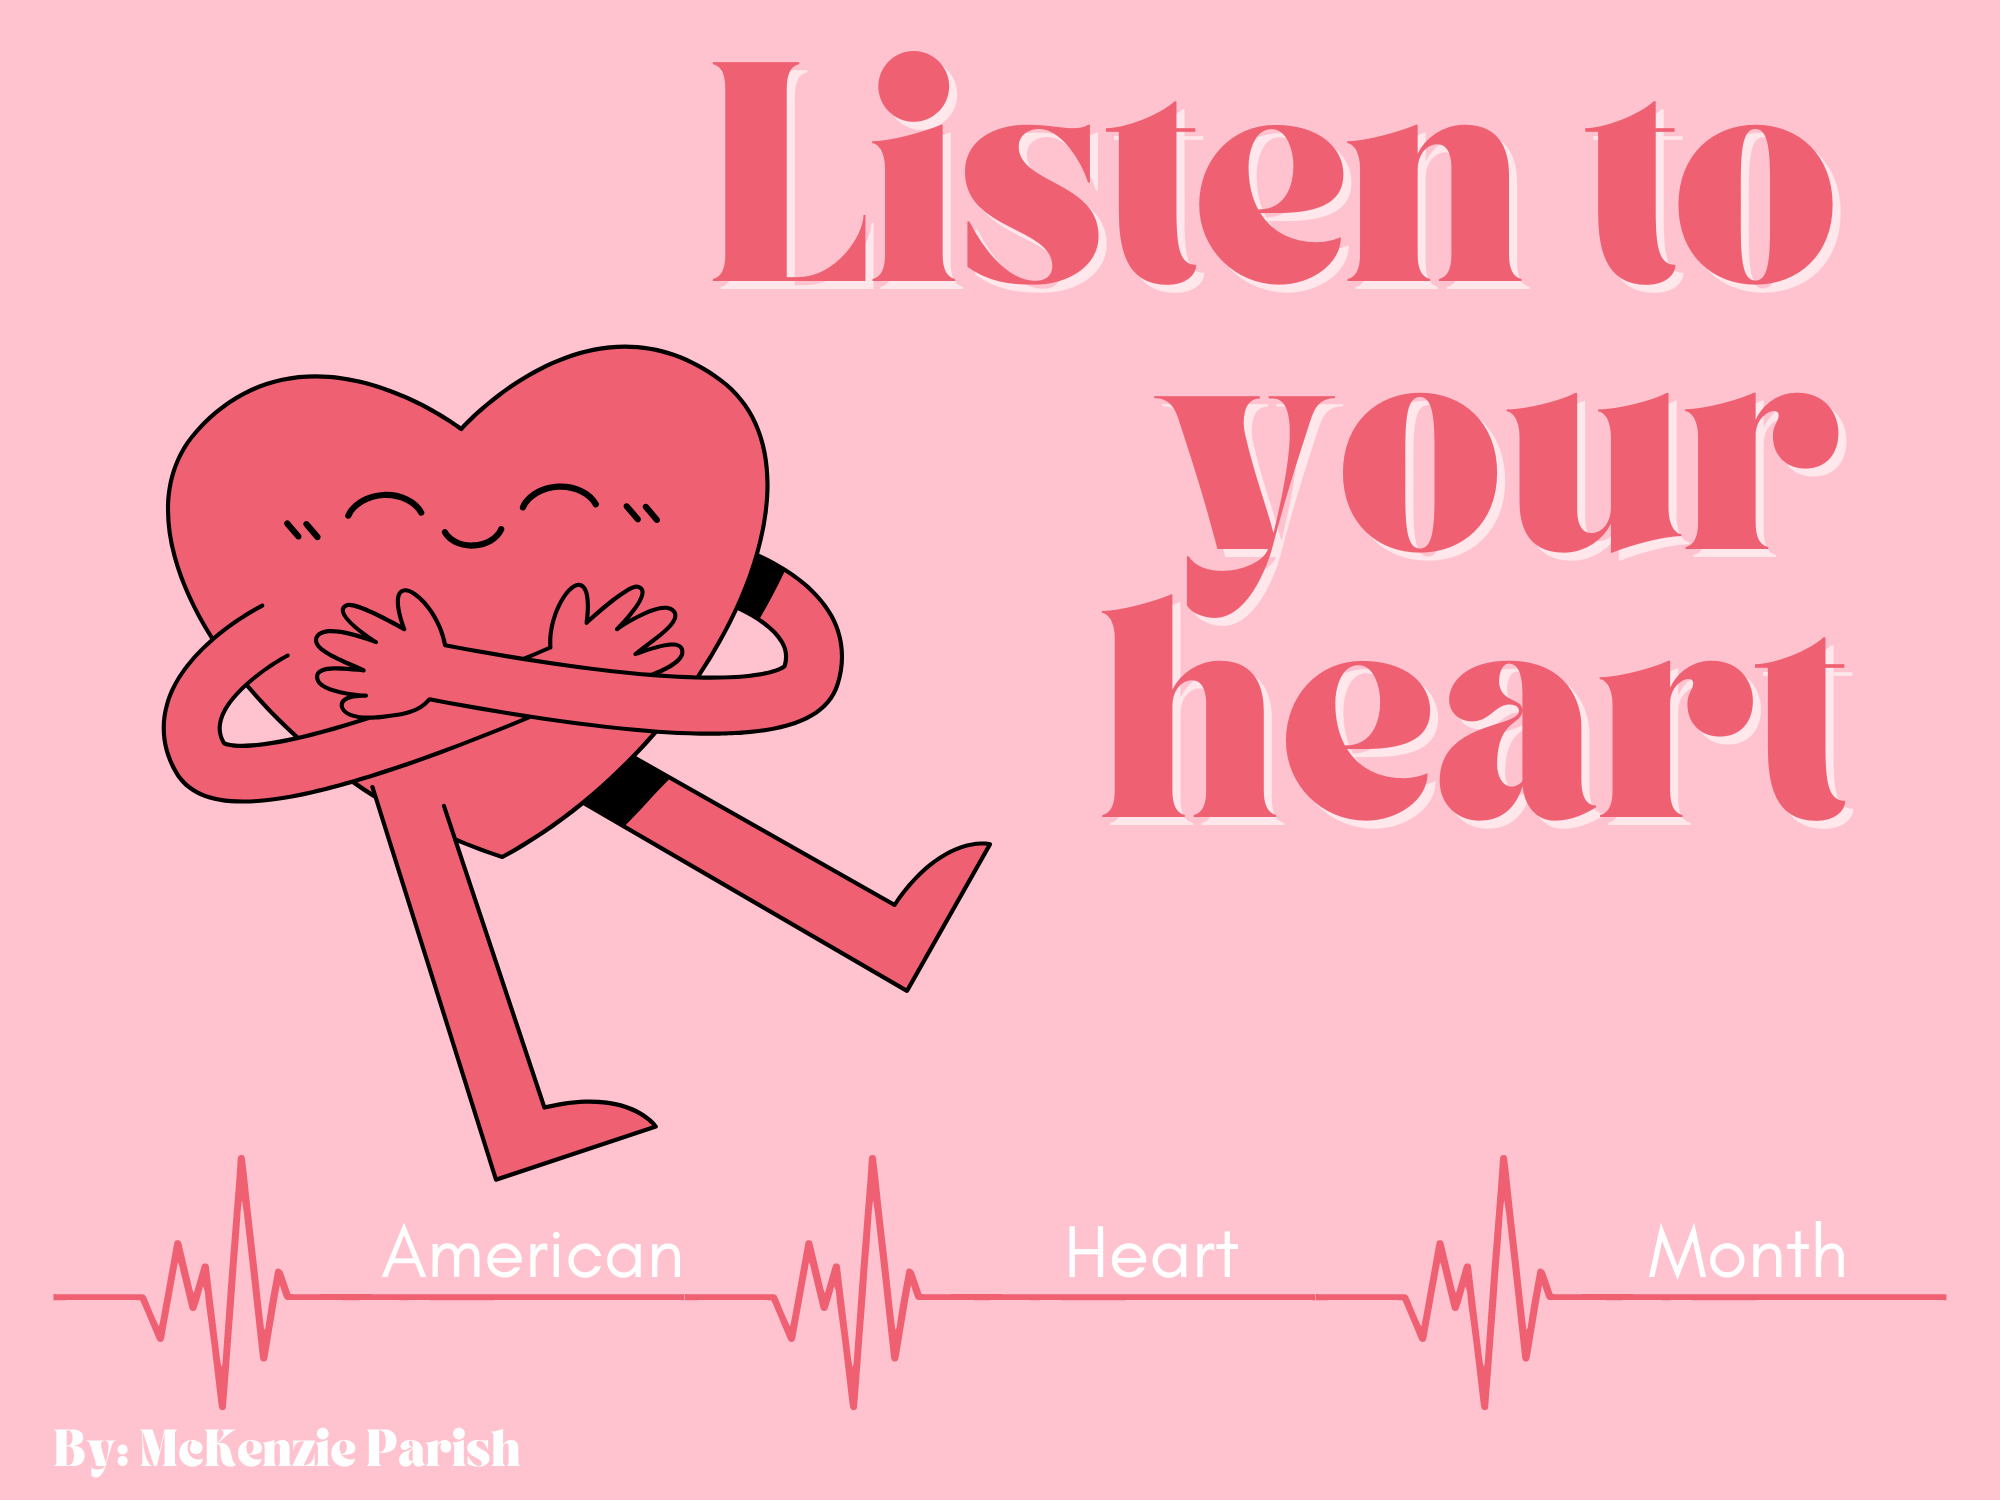 Listen to your heart, American Heart Month